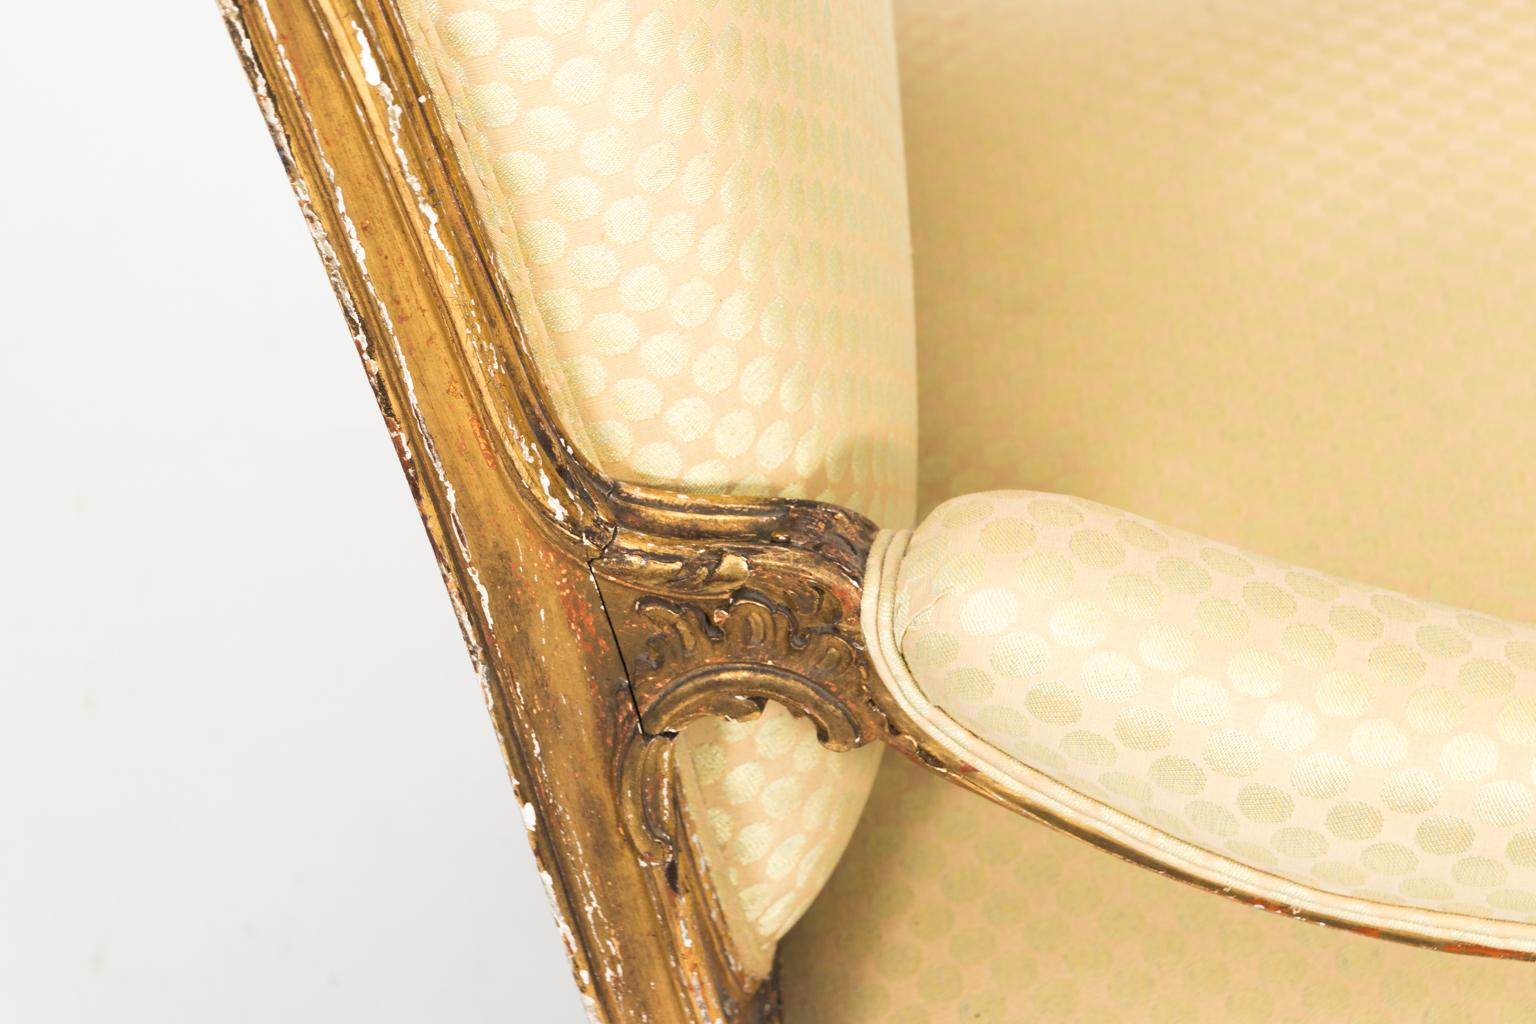 Giltwood chaise lounge armchair with new upholstery, circa 19th century.